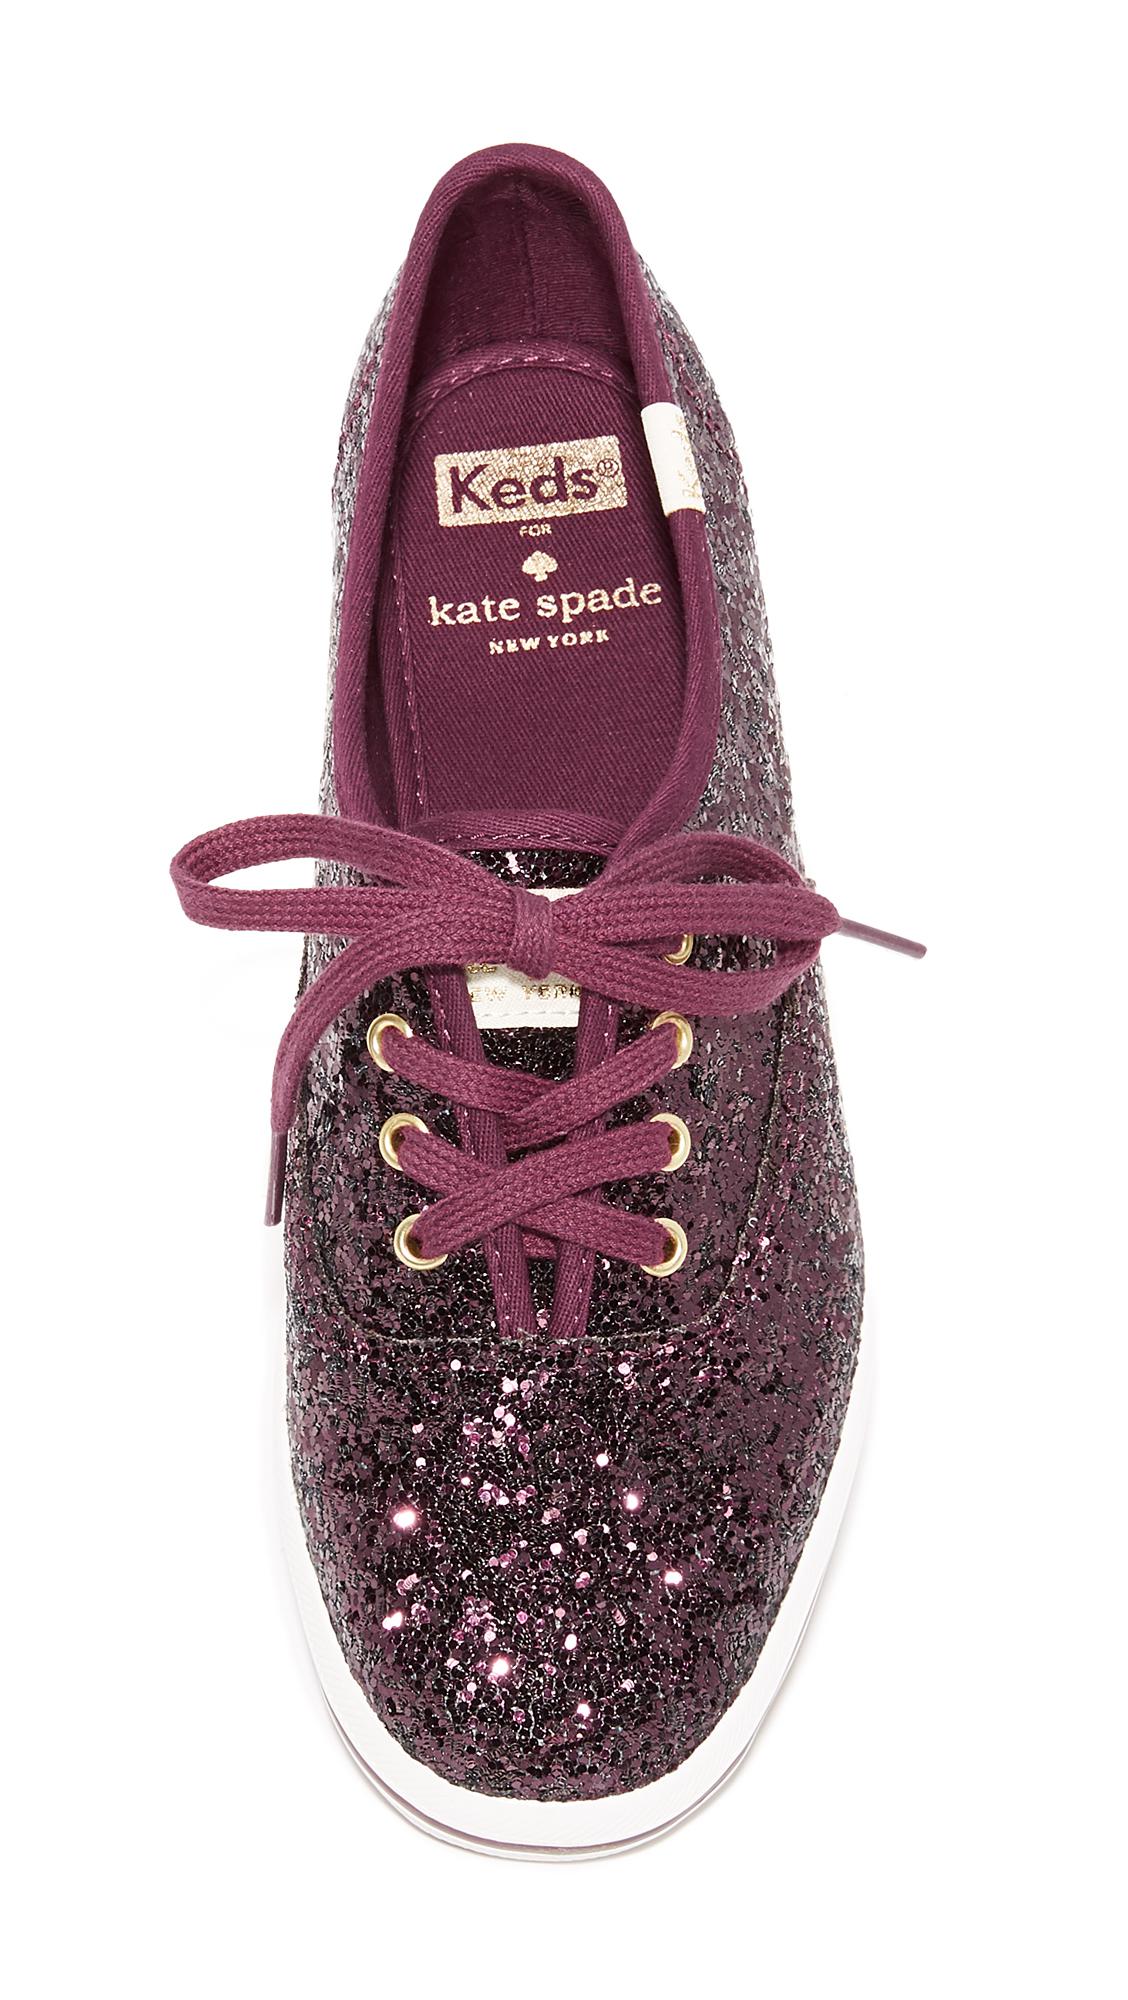 Keds for Kate Spade New York Gray Glitter Sneakers Shoes Womens 8 | eBay